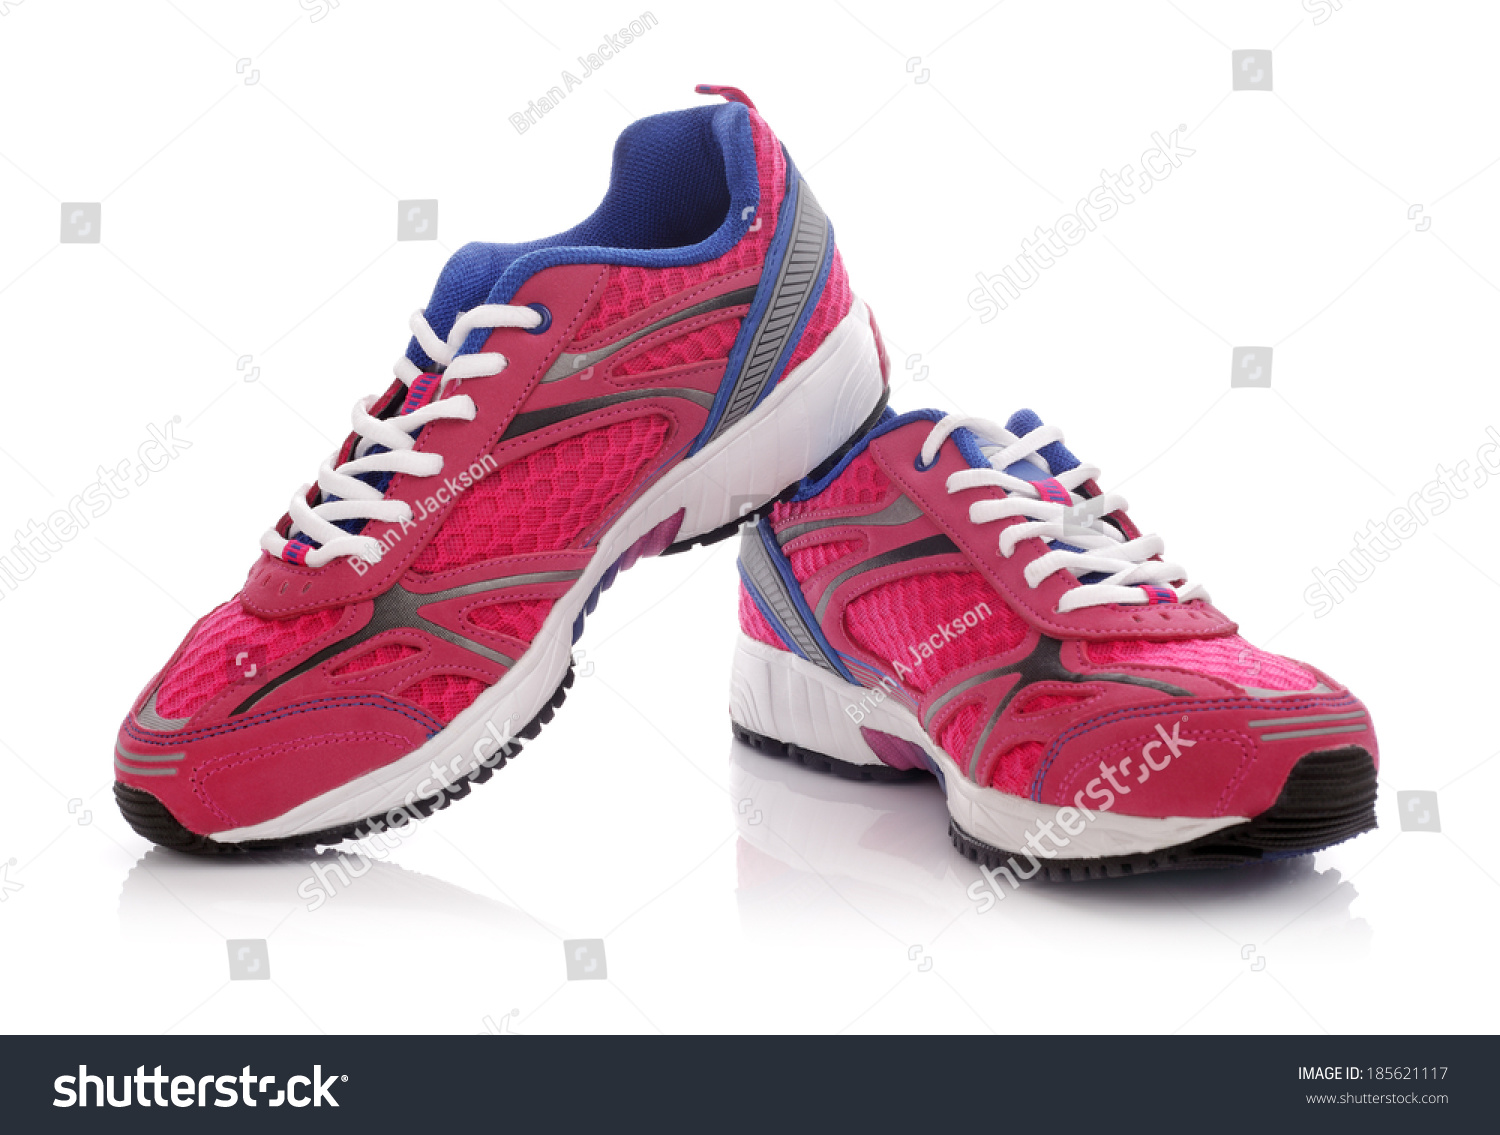 New Unbranded Running Shoe Sneaker Trainer Stock Photo (Edit Now) 185621117